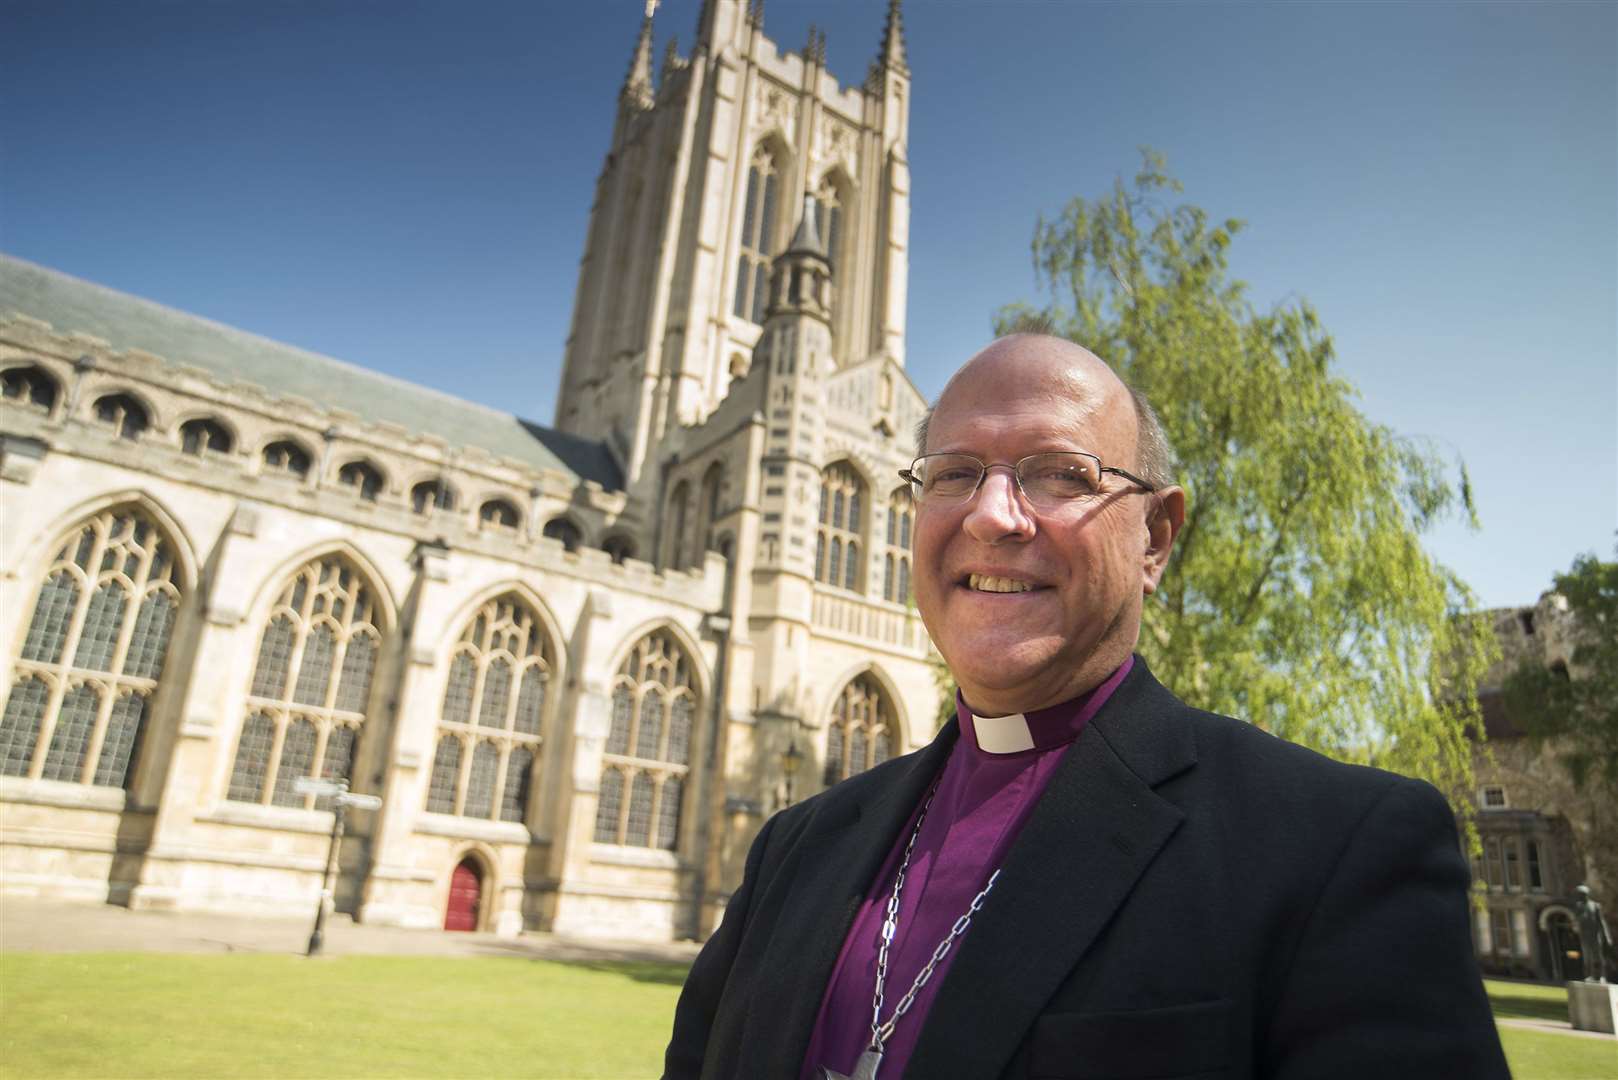 The Right Rev Martin Seeley, Bishop of the Diocese of St Edmundsbury and Ipswich. Picture: Mark Westley